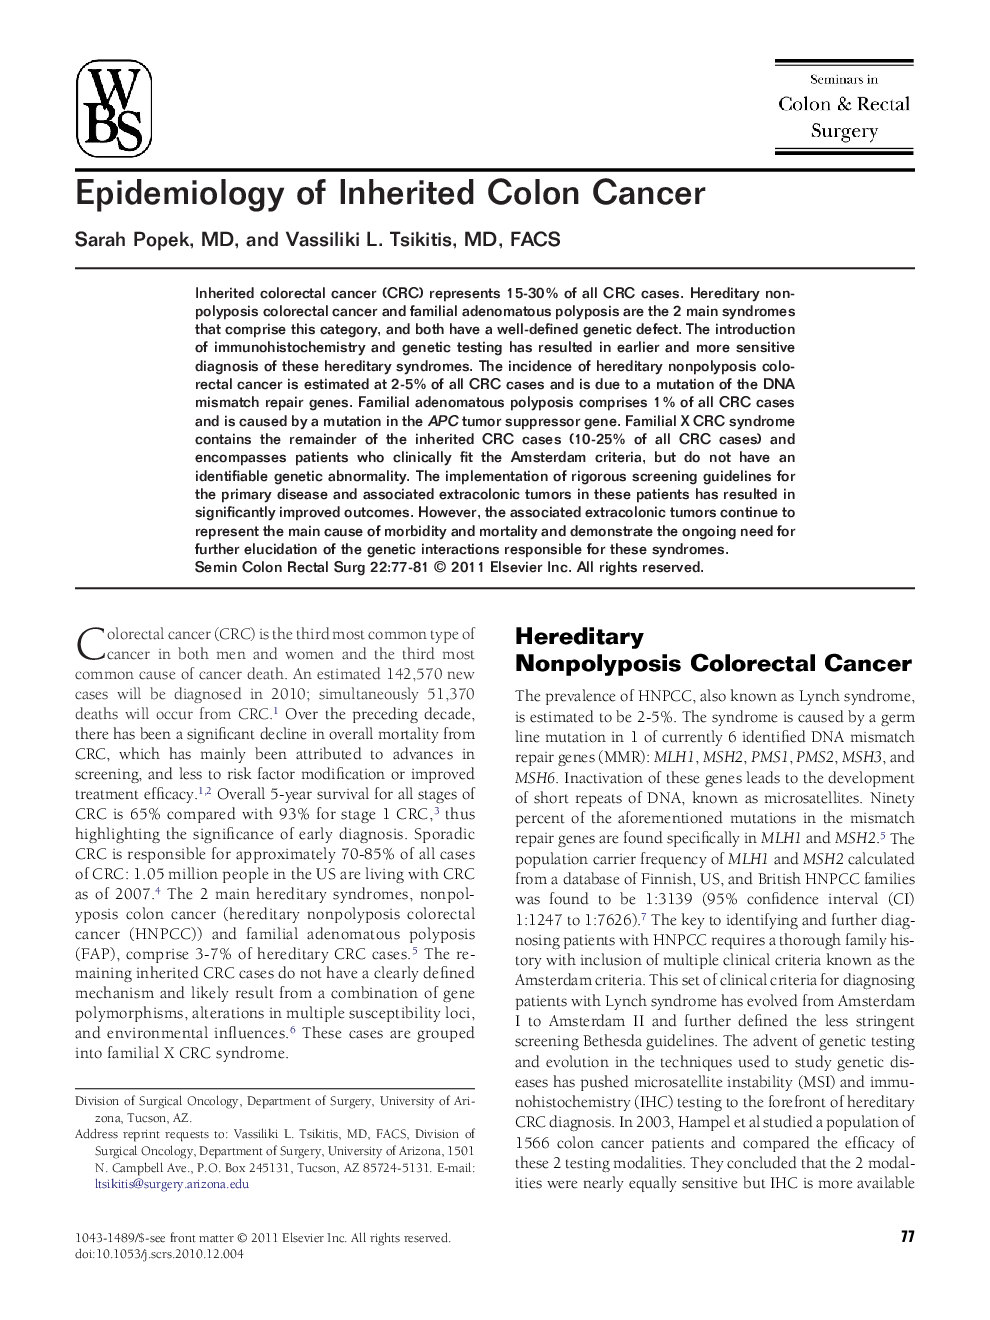 Epidemiology of Inherited Colon Cancer